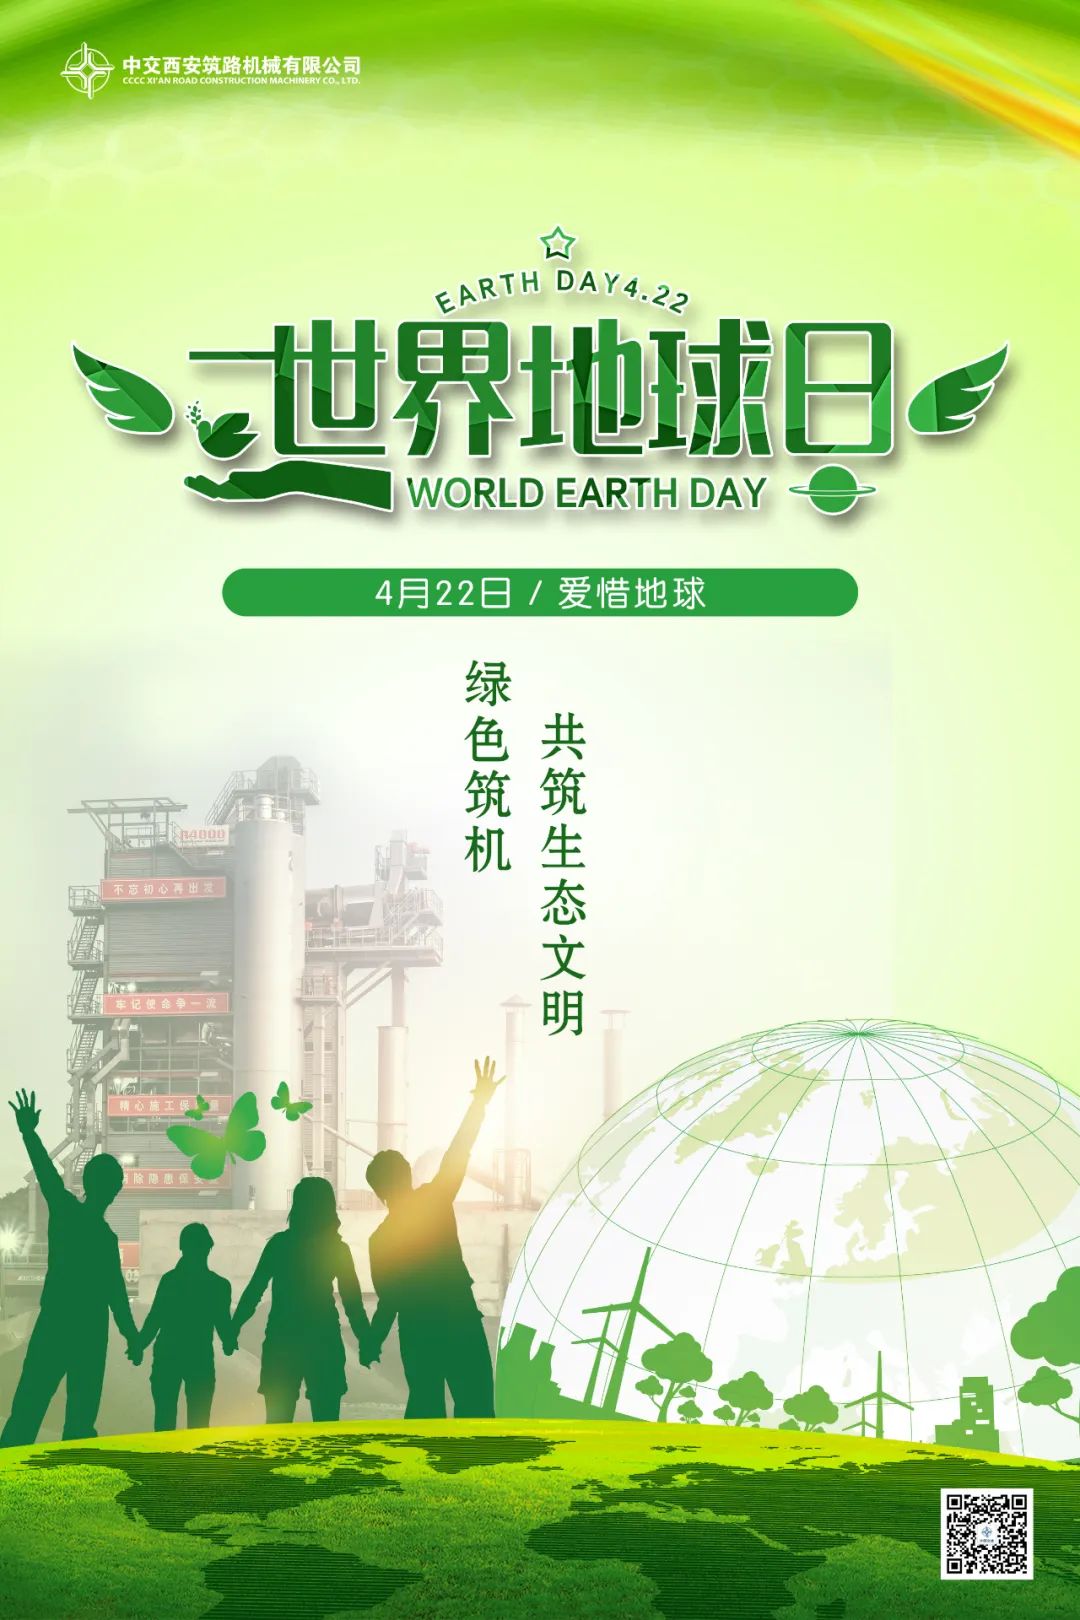 World Earth Day | CCCC Xizhu will practice the green concept with you and draw the blueprint of the earth together